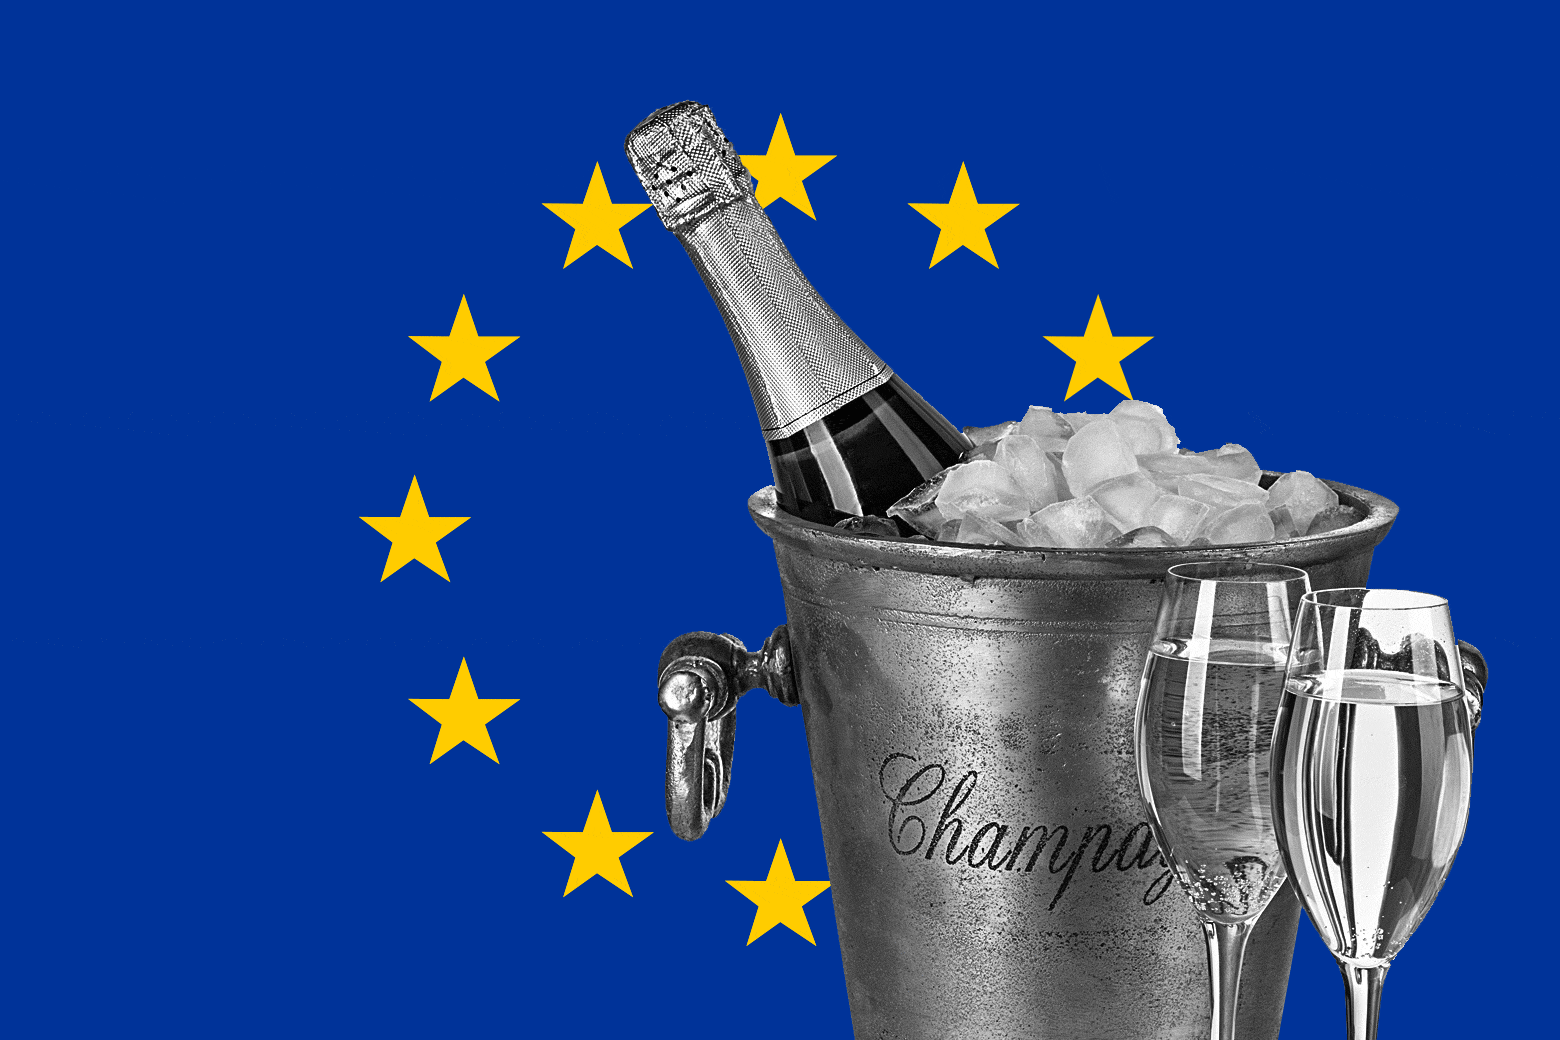 Champagne on ice superimposed over an EU flag. 